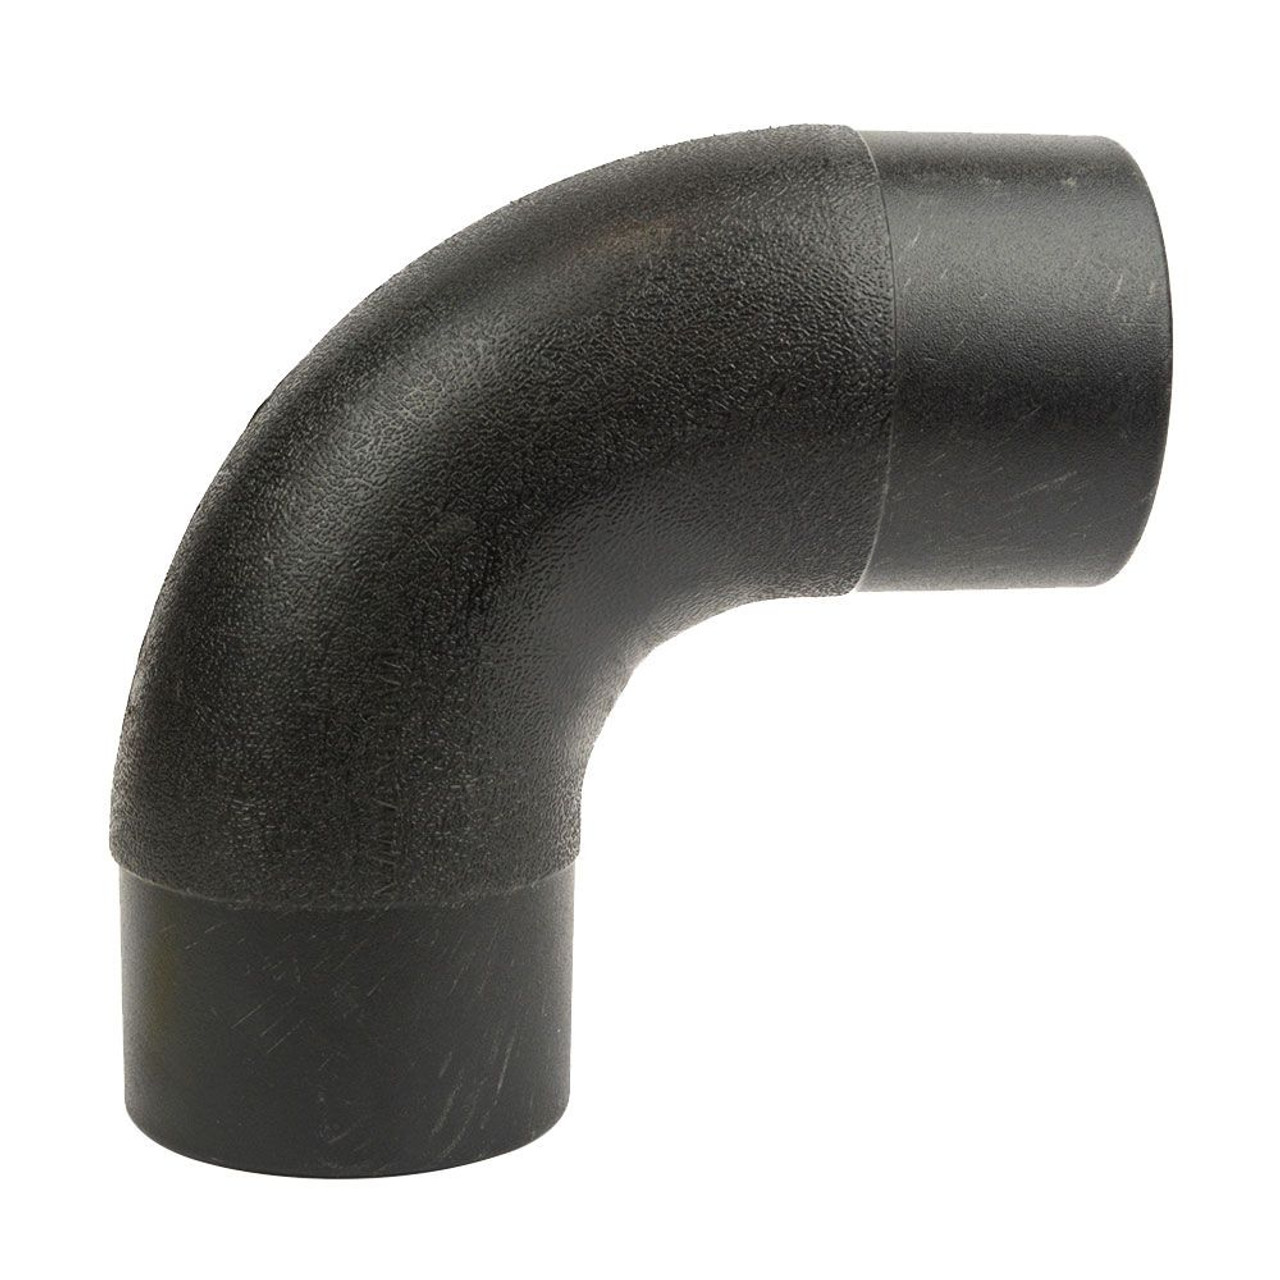 Big Horn 4 Inch 90 Elbow Fitting (Replaces Jet JW1017) 11412